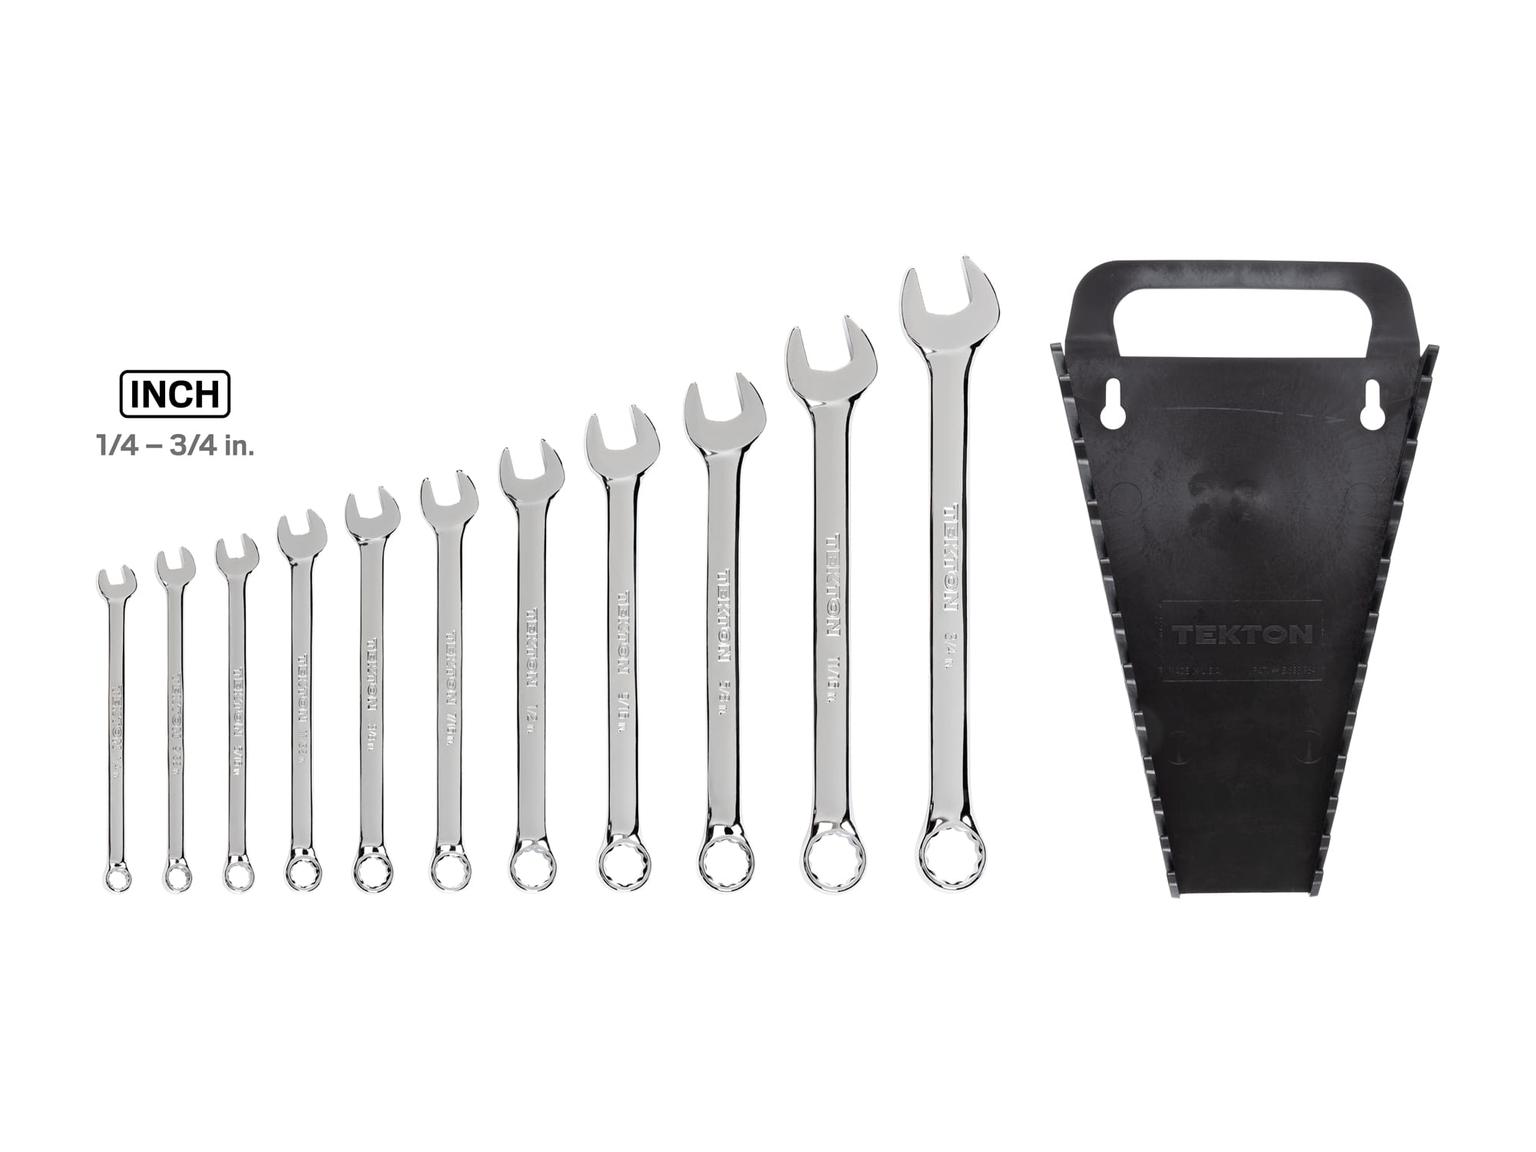 TEKTON WCB91101-T Combination Wrench Set with Holder, 11-Piece (1/4 - 3/4 in.)